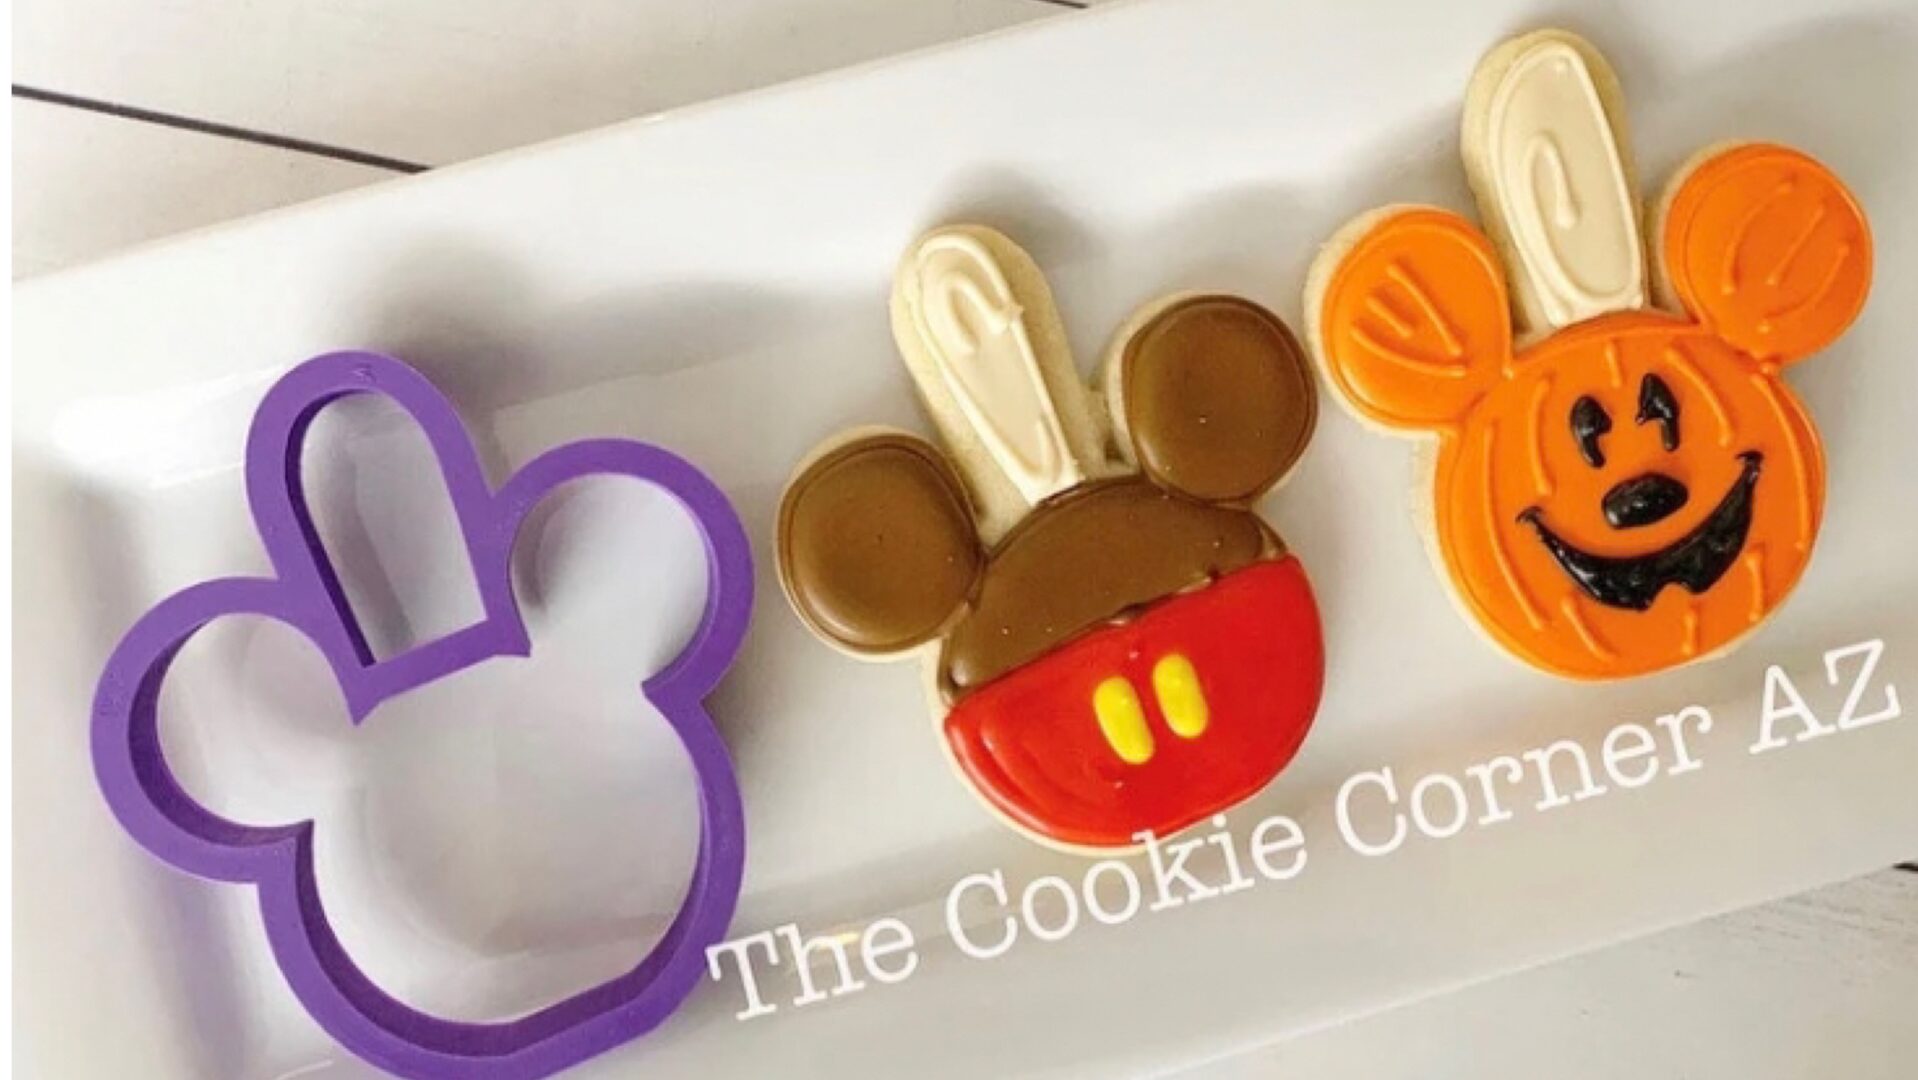 Have Fun Baking With This Mickey Apple Cookie Cutter!